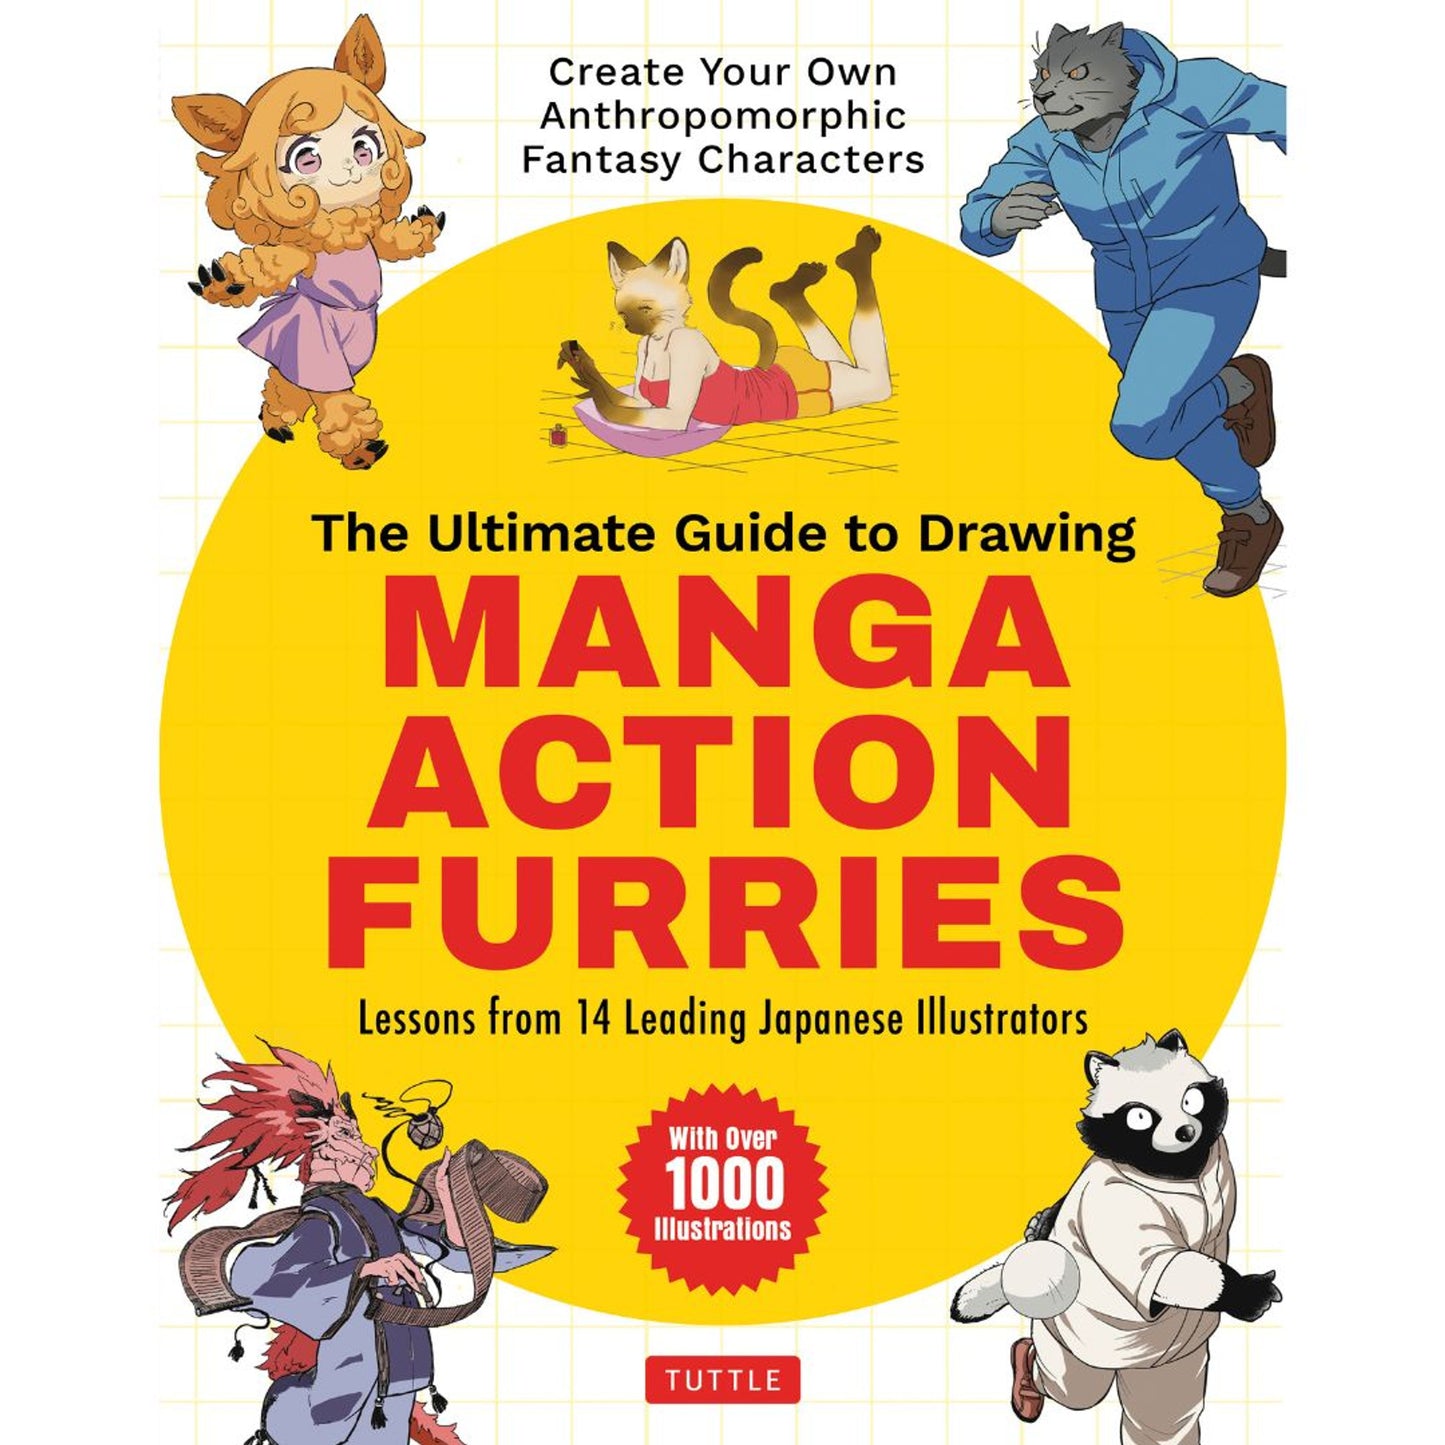 THE ULTIMATE GUIDE TO DRAWING MANGA ACTION FURRIES